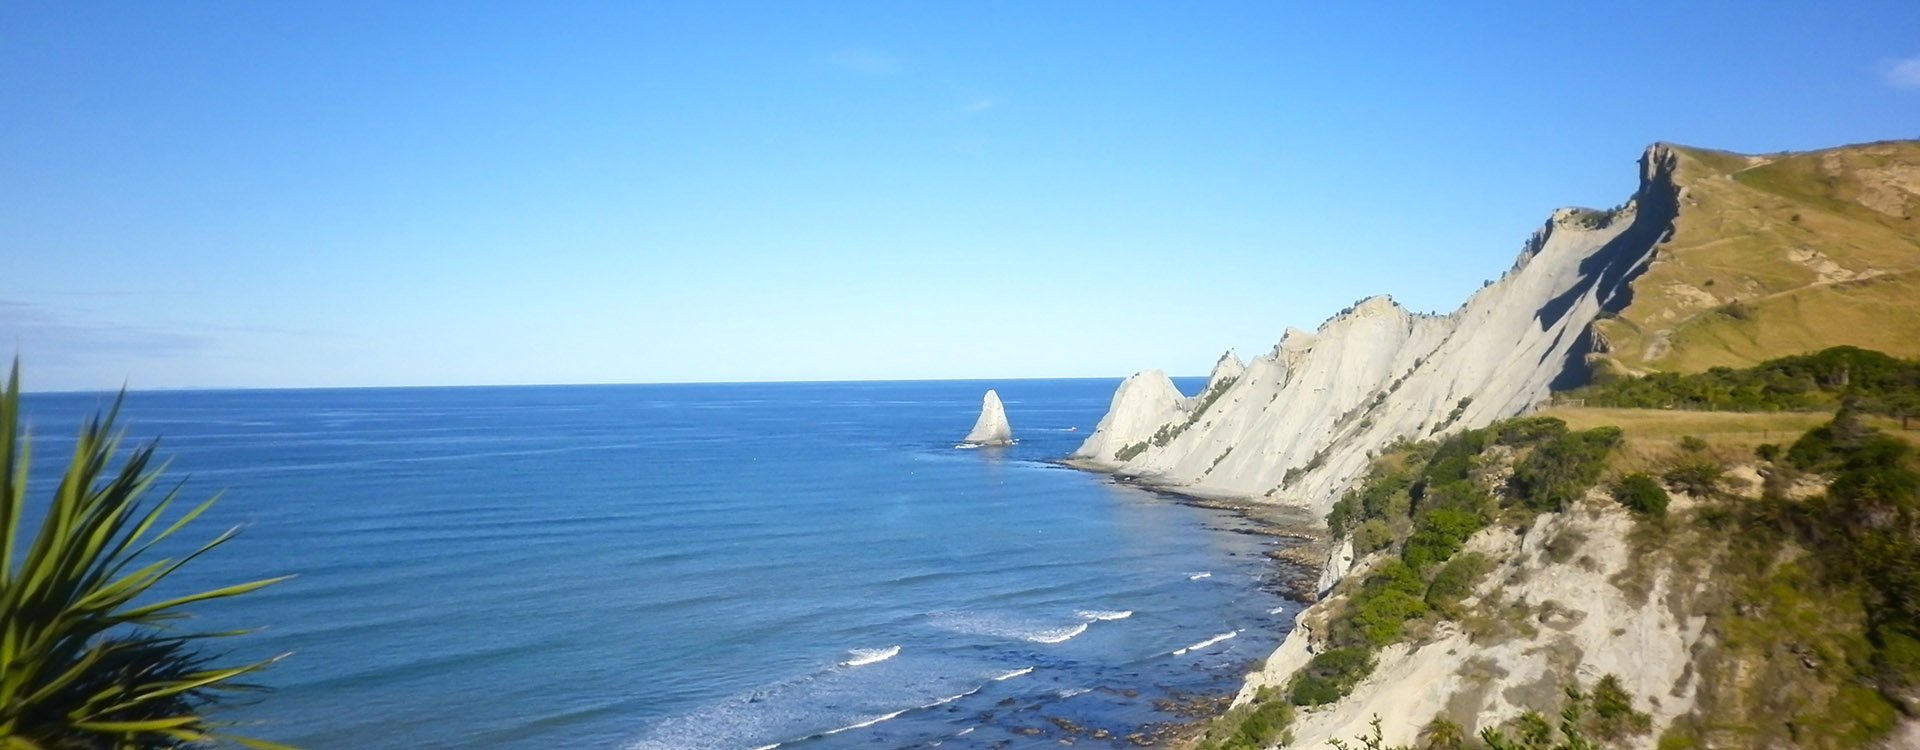 Cape Kidnappers, Hawkes Bay, North Island, New Zealand on a clear sunny day